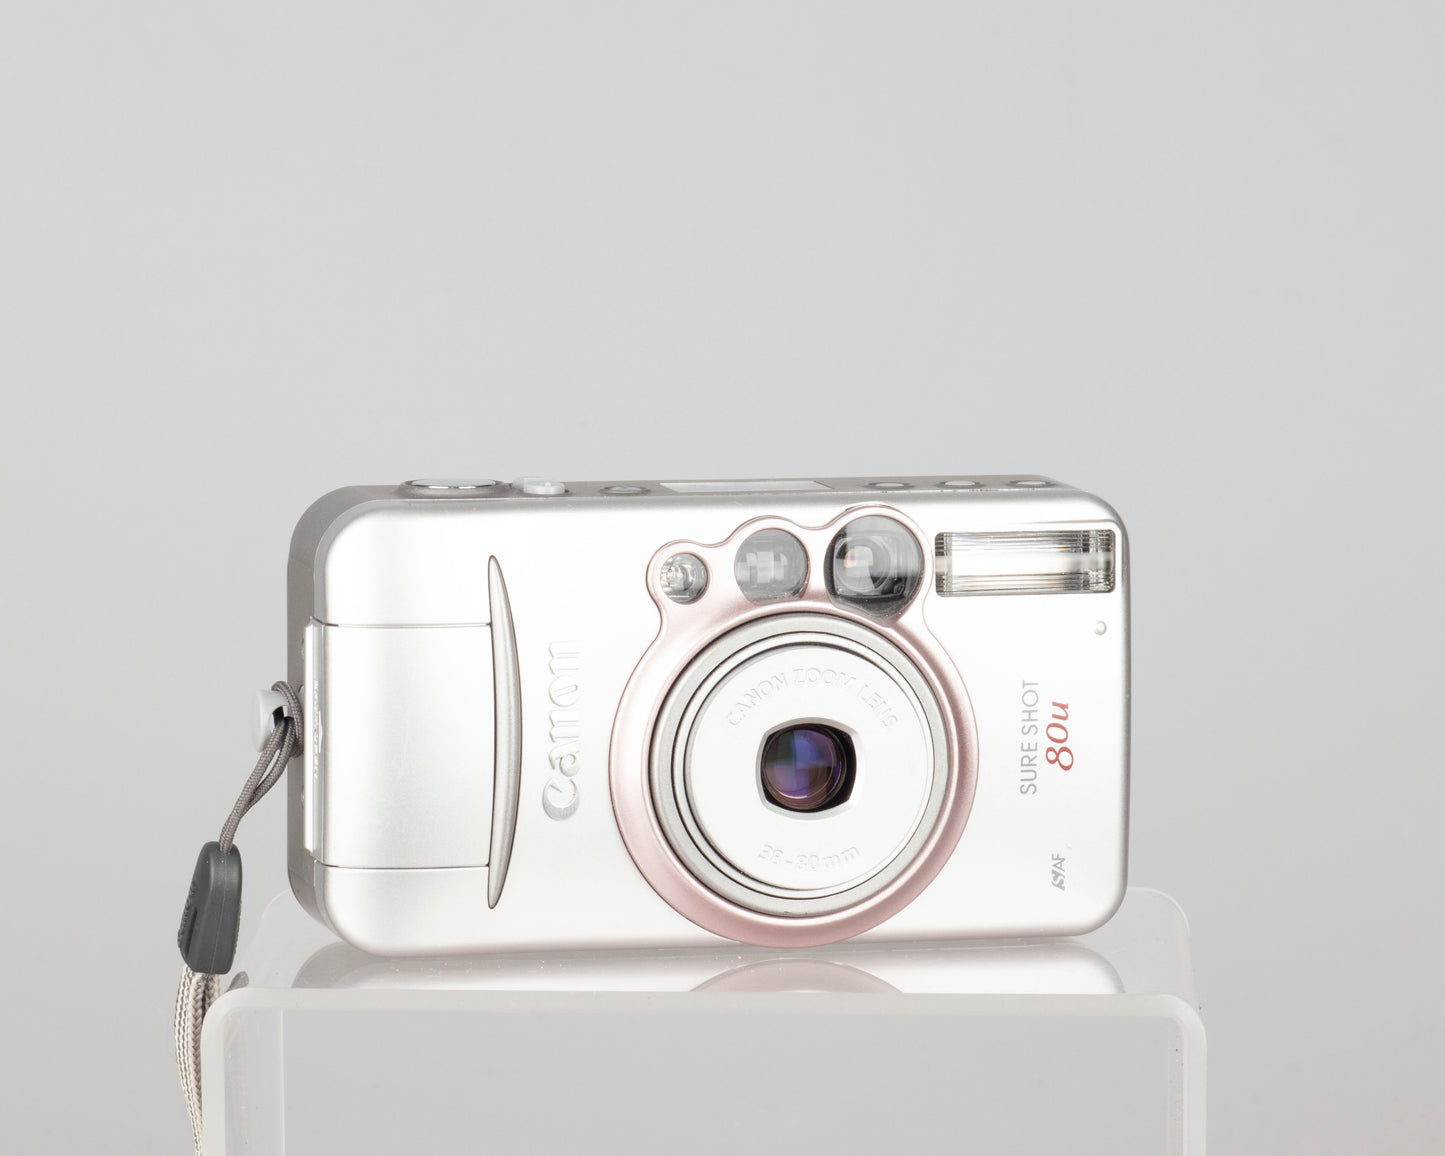 The Canon Sure Shot 80u is a quality ultra-compact 35mm point and shoot camera from the early aughts